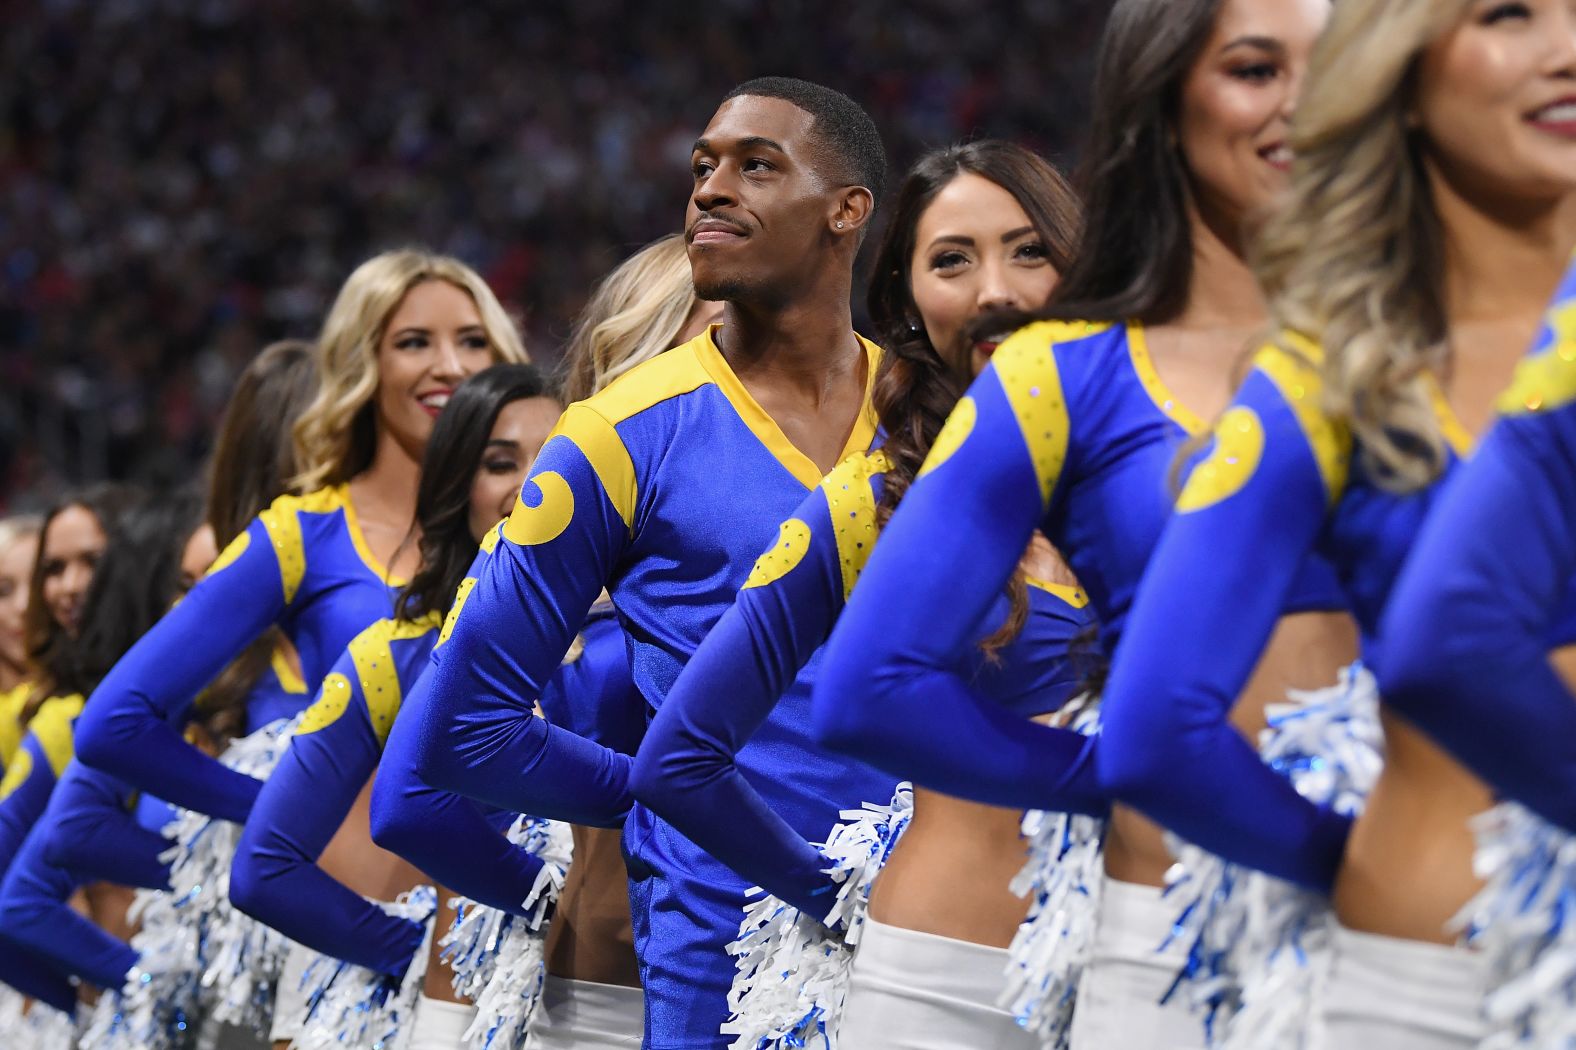 Rams cheerleader Quinton Peron looks on during Super Bowl LIII. This is the first Super Bowl <a href="index.php?page=&url=https%3A%2F%2Fwww.cnn.com%2F2019%2F02%2F02%2Fopinions%2Fsuper-bowl-male-cheerleaders-debut-roxanne-jones%2Findex.html" target="_blank">to feature male cheerleaders. </a>